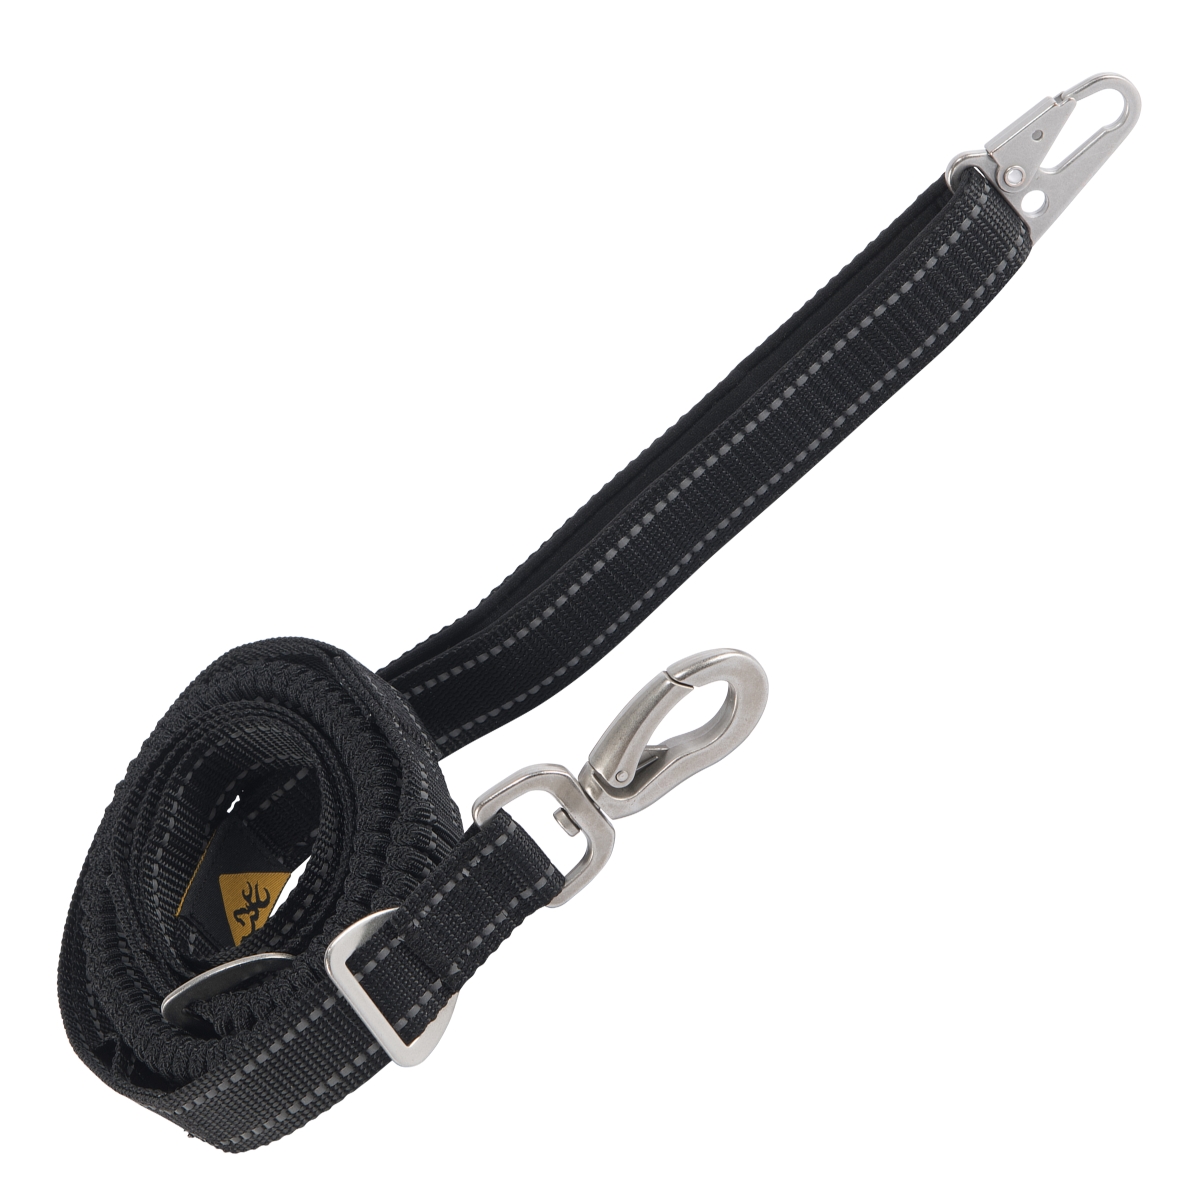 P000026200199 6 Ft. X 1 In. Shock Absorbing Control Dog Leash - Black